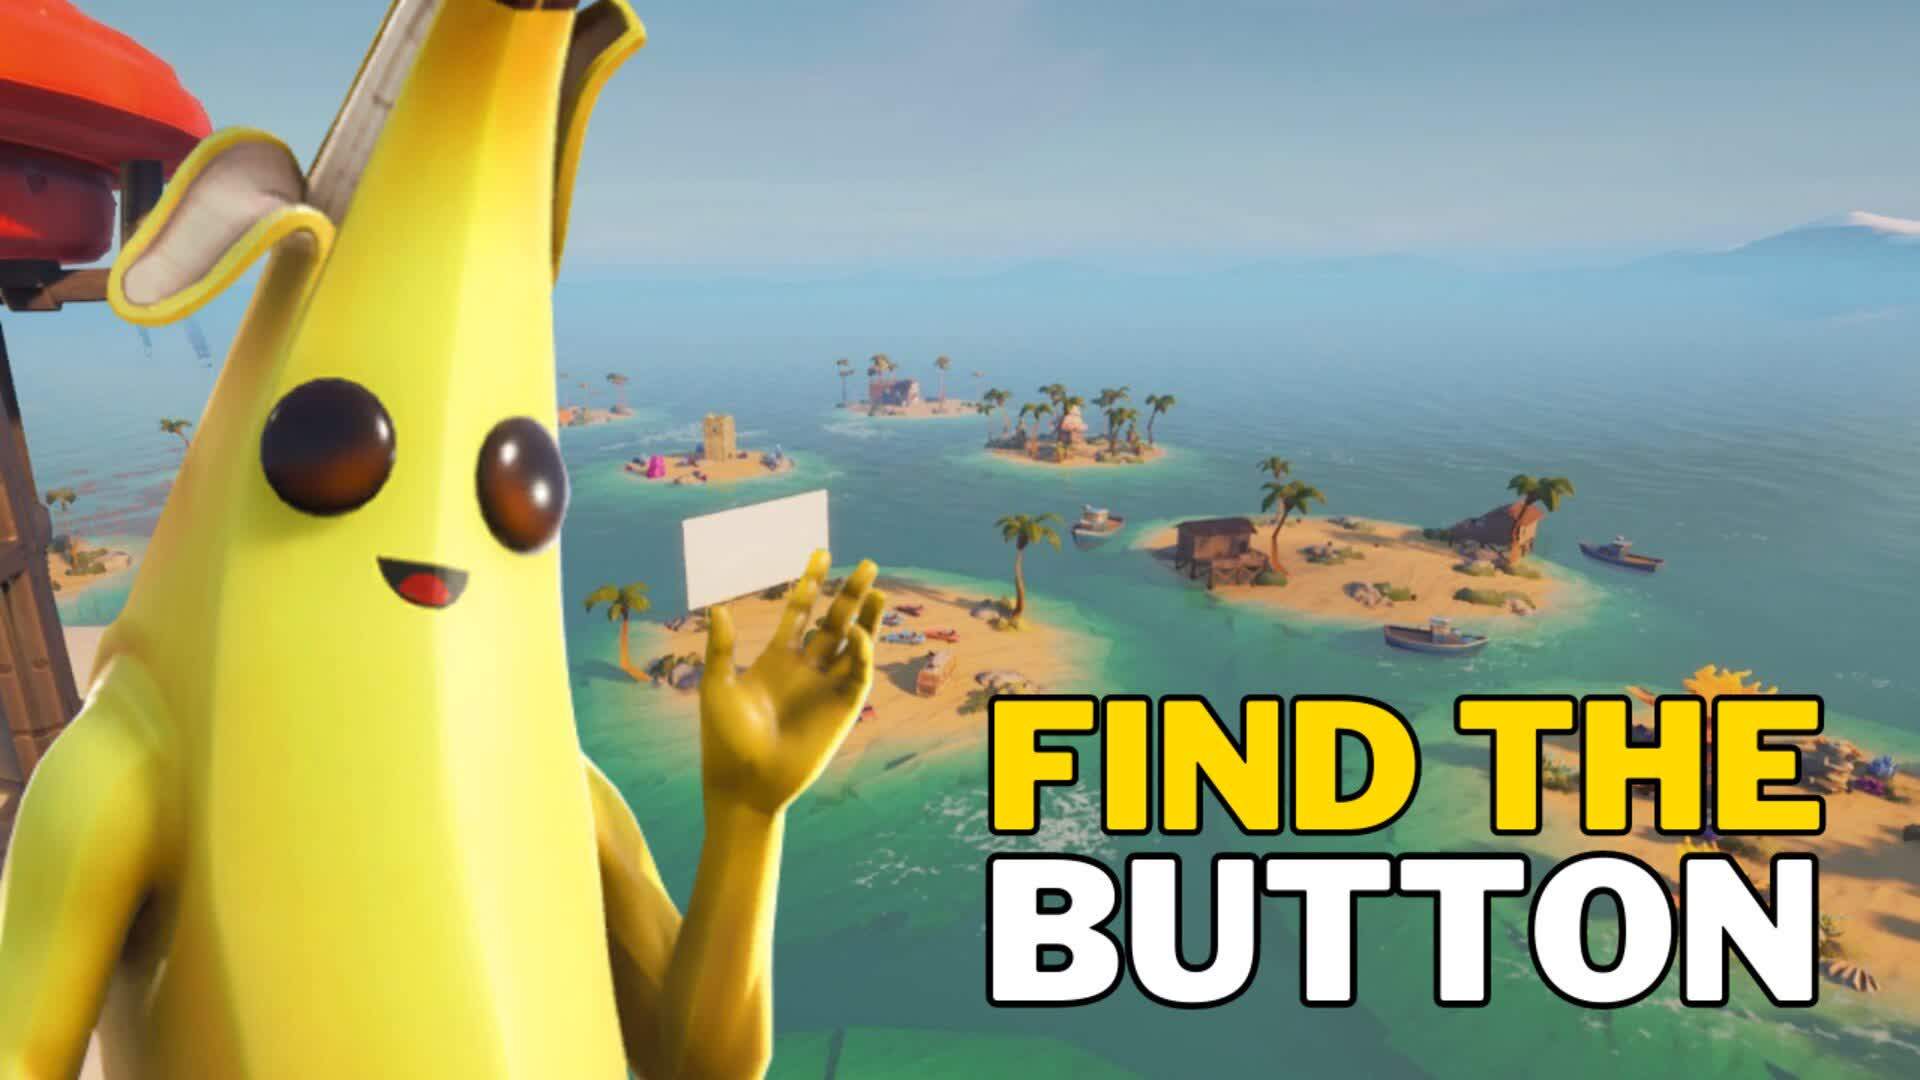 Find the button - Summer edition